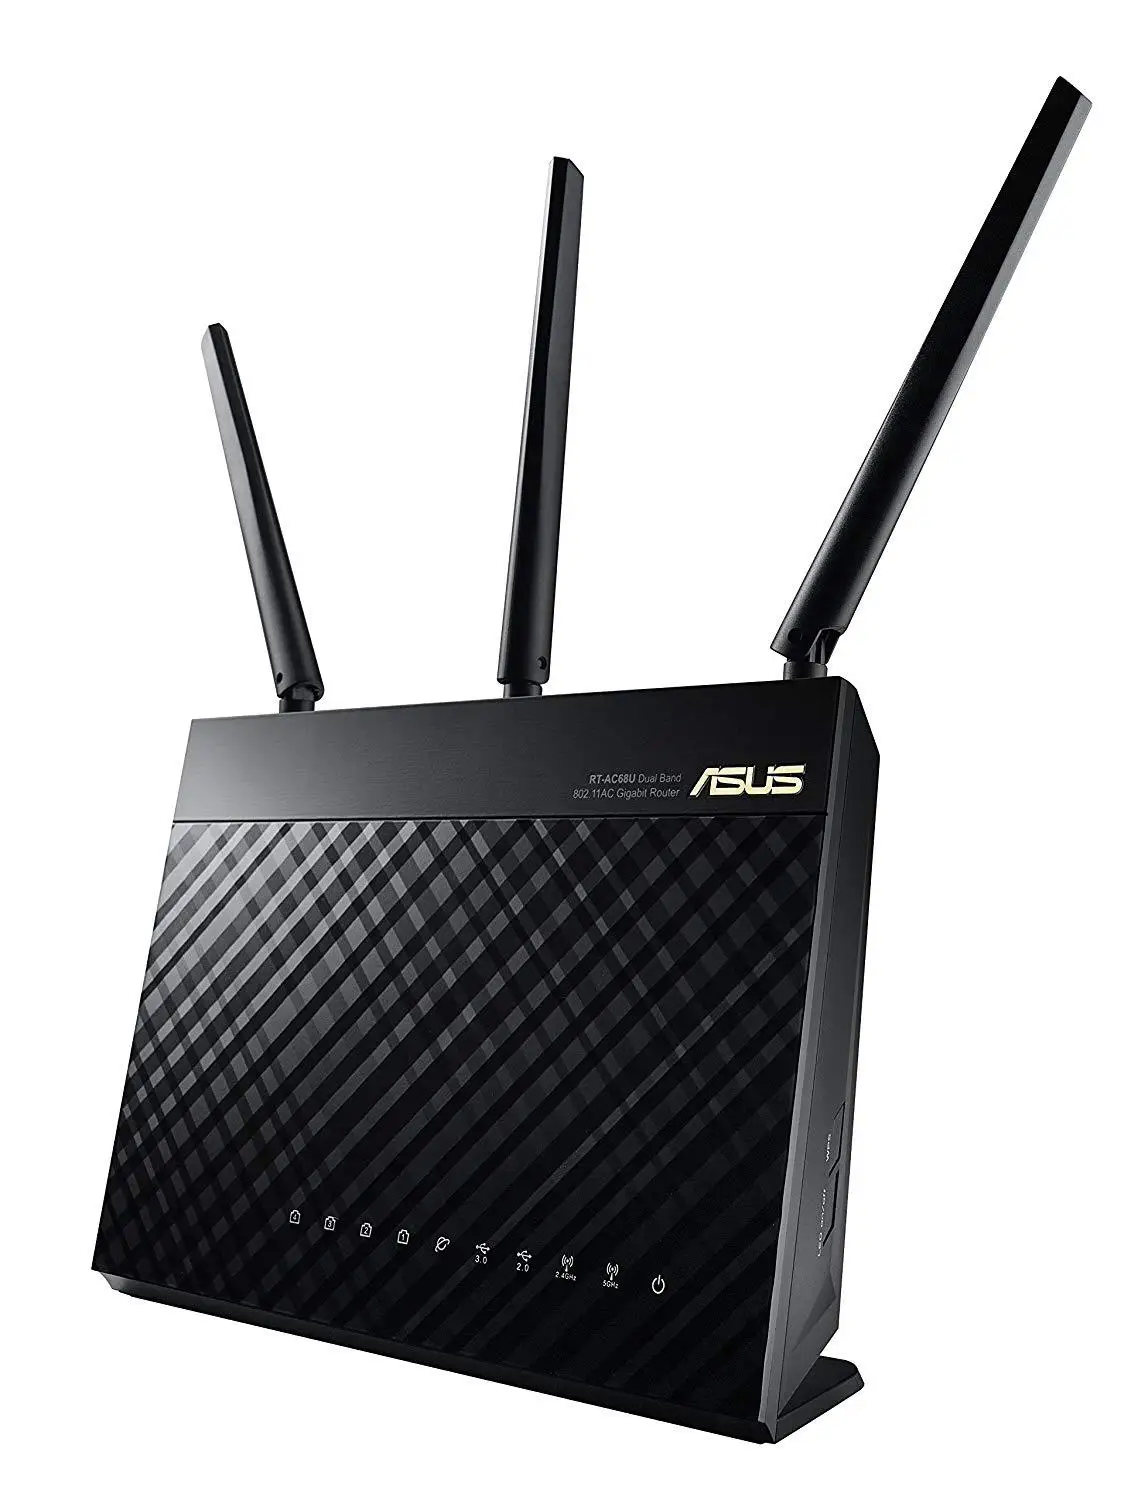 ASUS RT-AC68U Whole Home Dual-Band AiMesh WI-FI Router Upgradable Merlin AC1900 1900 Mbps AiProtection Network Security by Trend